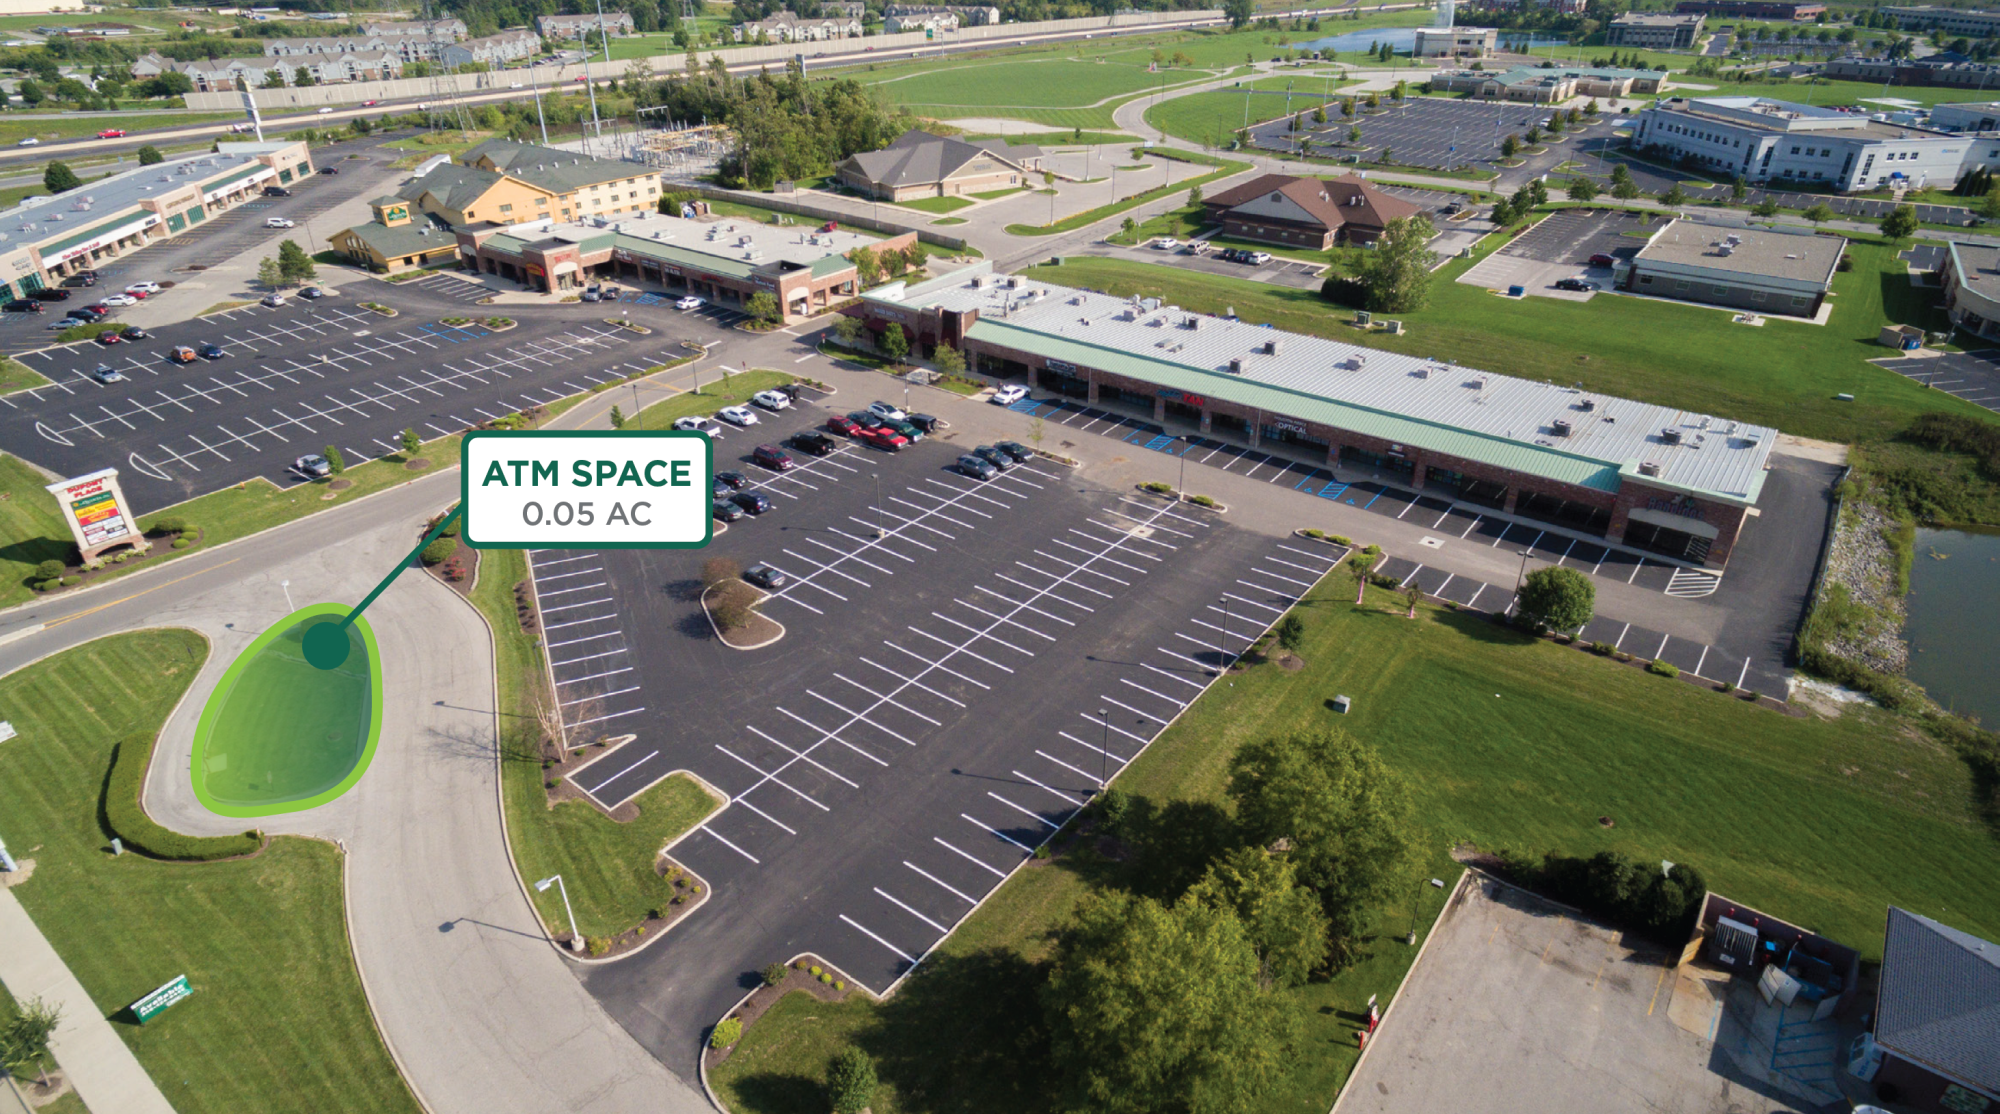 Sturges Property Group - ATM outparcel space for lease Northeast Fort Wayne Indiana